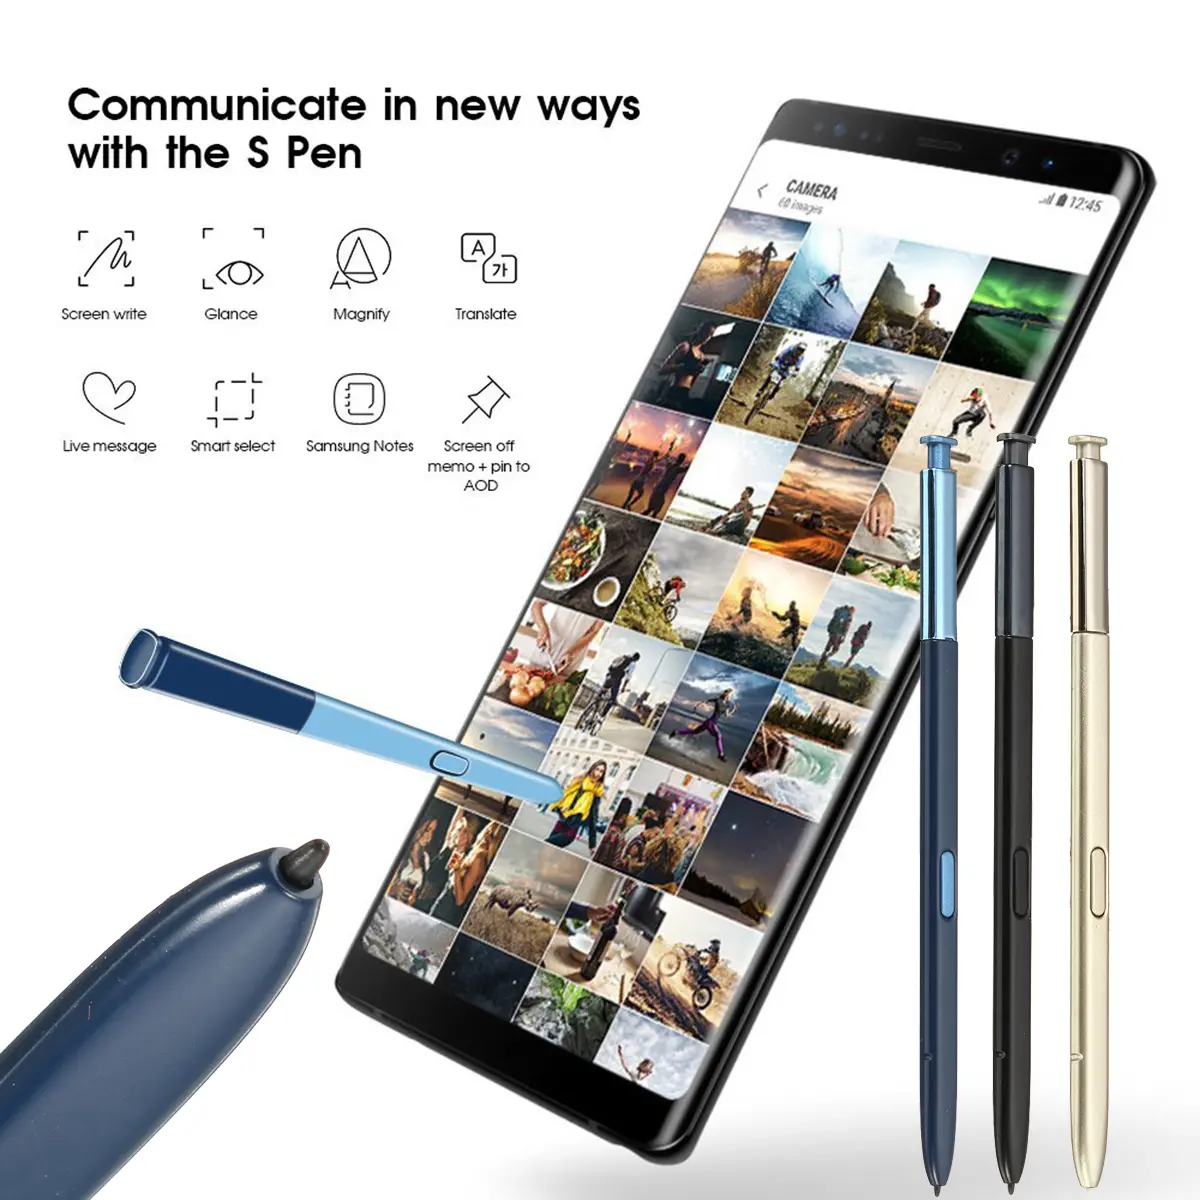 Stylus S Pen For Samsung Galaxy Note 8 AT&T Verizon T-Mobile Sprint